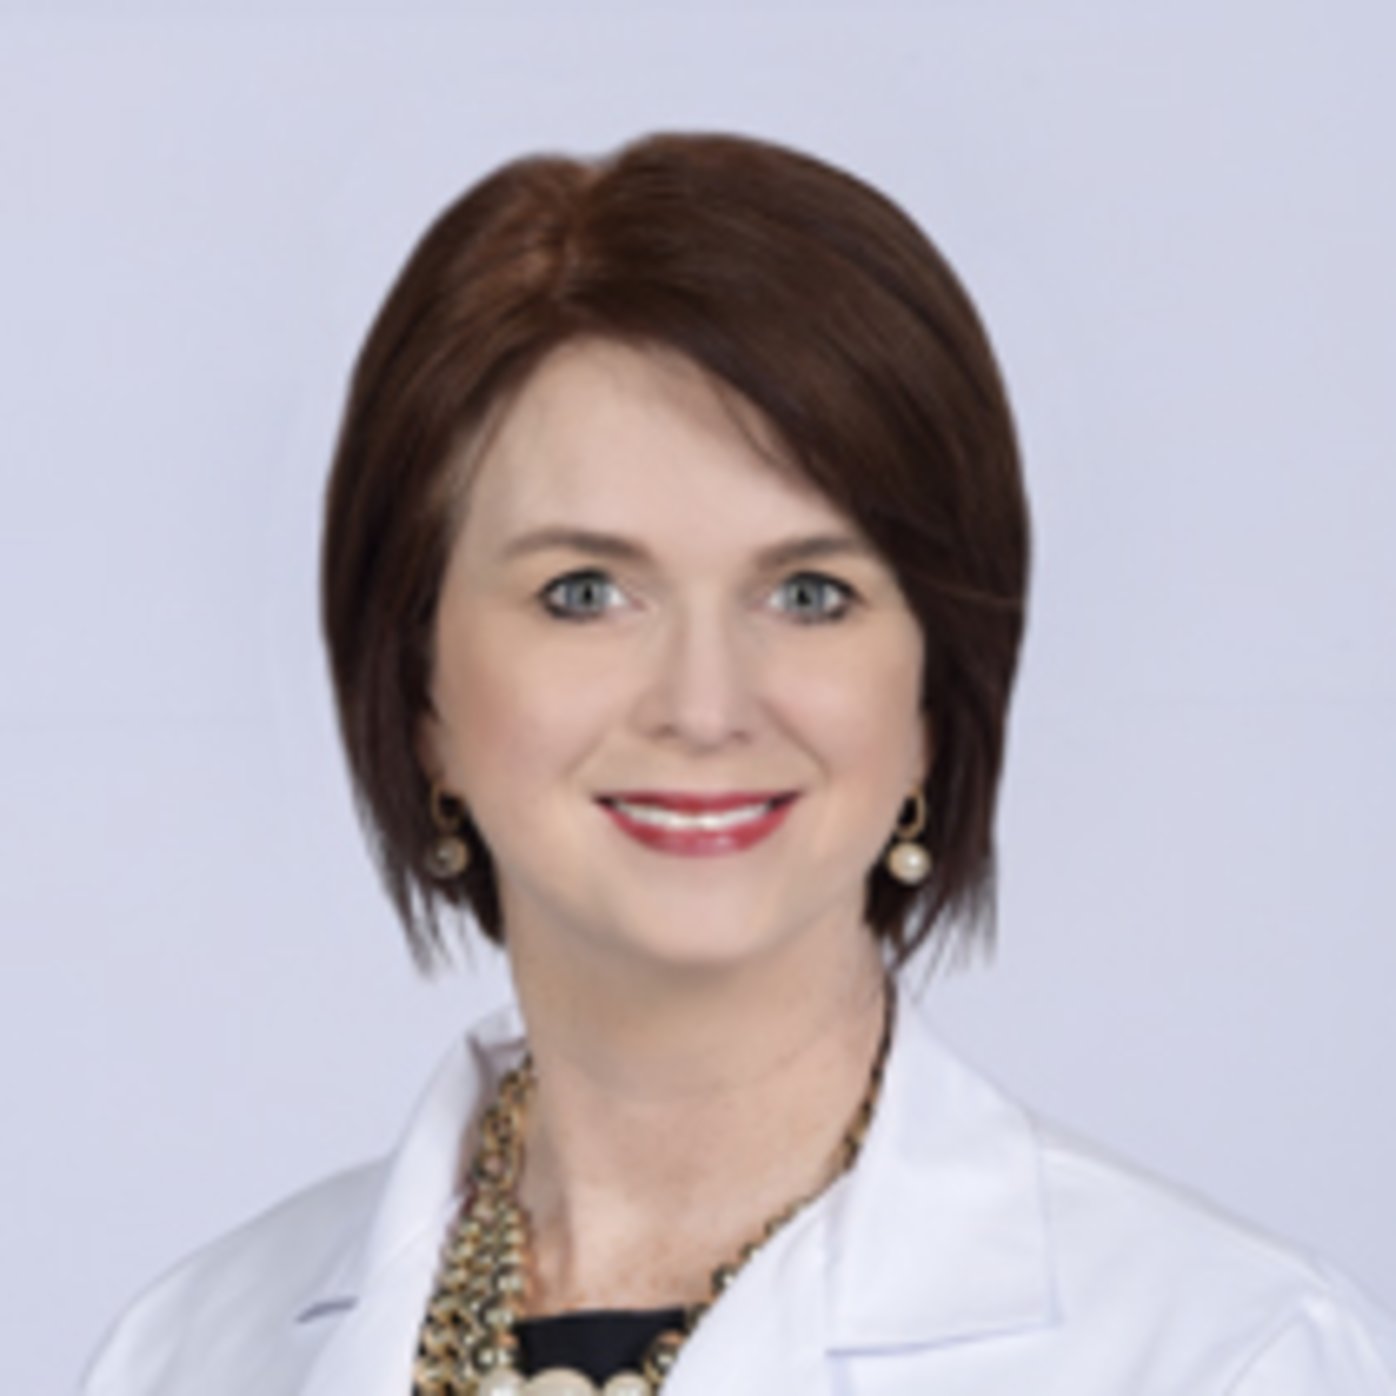 Dr. Deirdre McCullough is a board-certified maternal fetal medicine specialist affiliated with Sharp Grossmont Hospital.